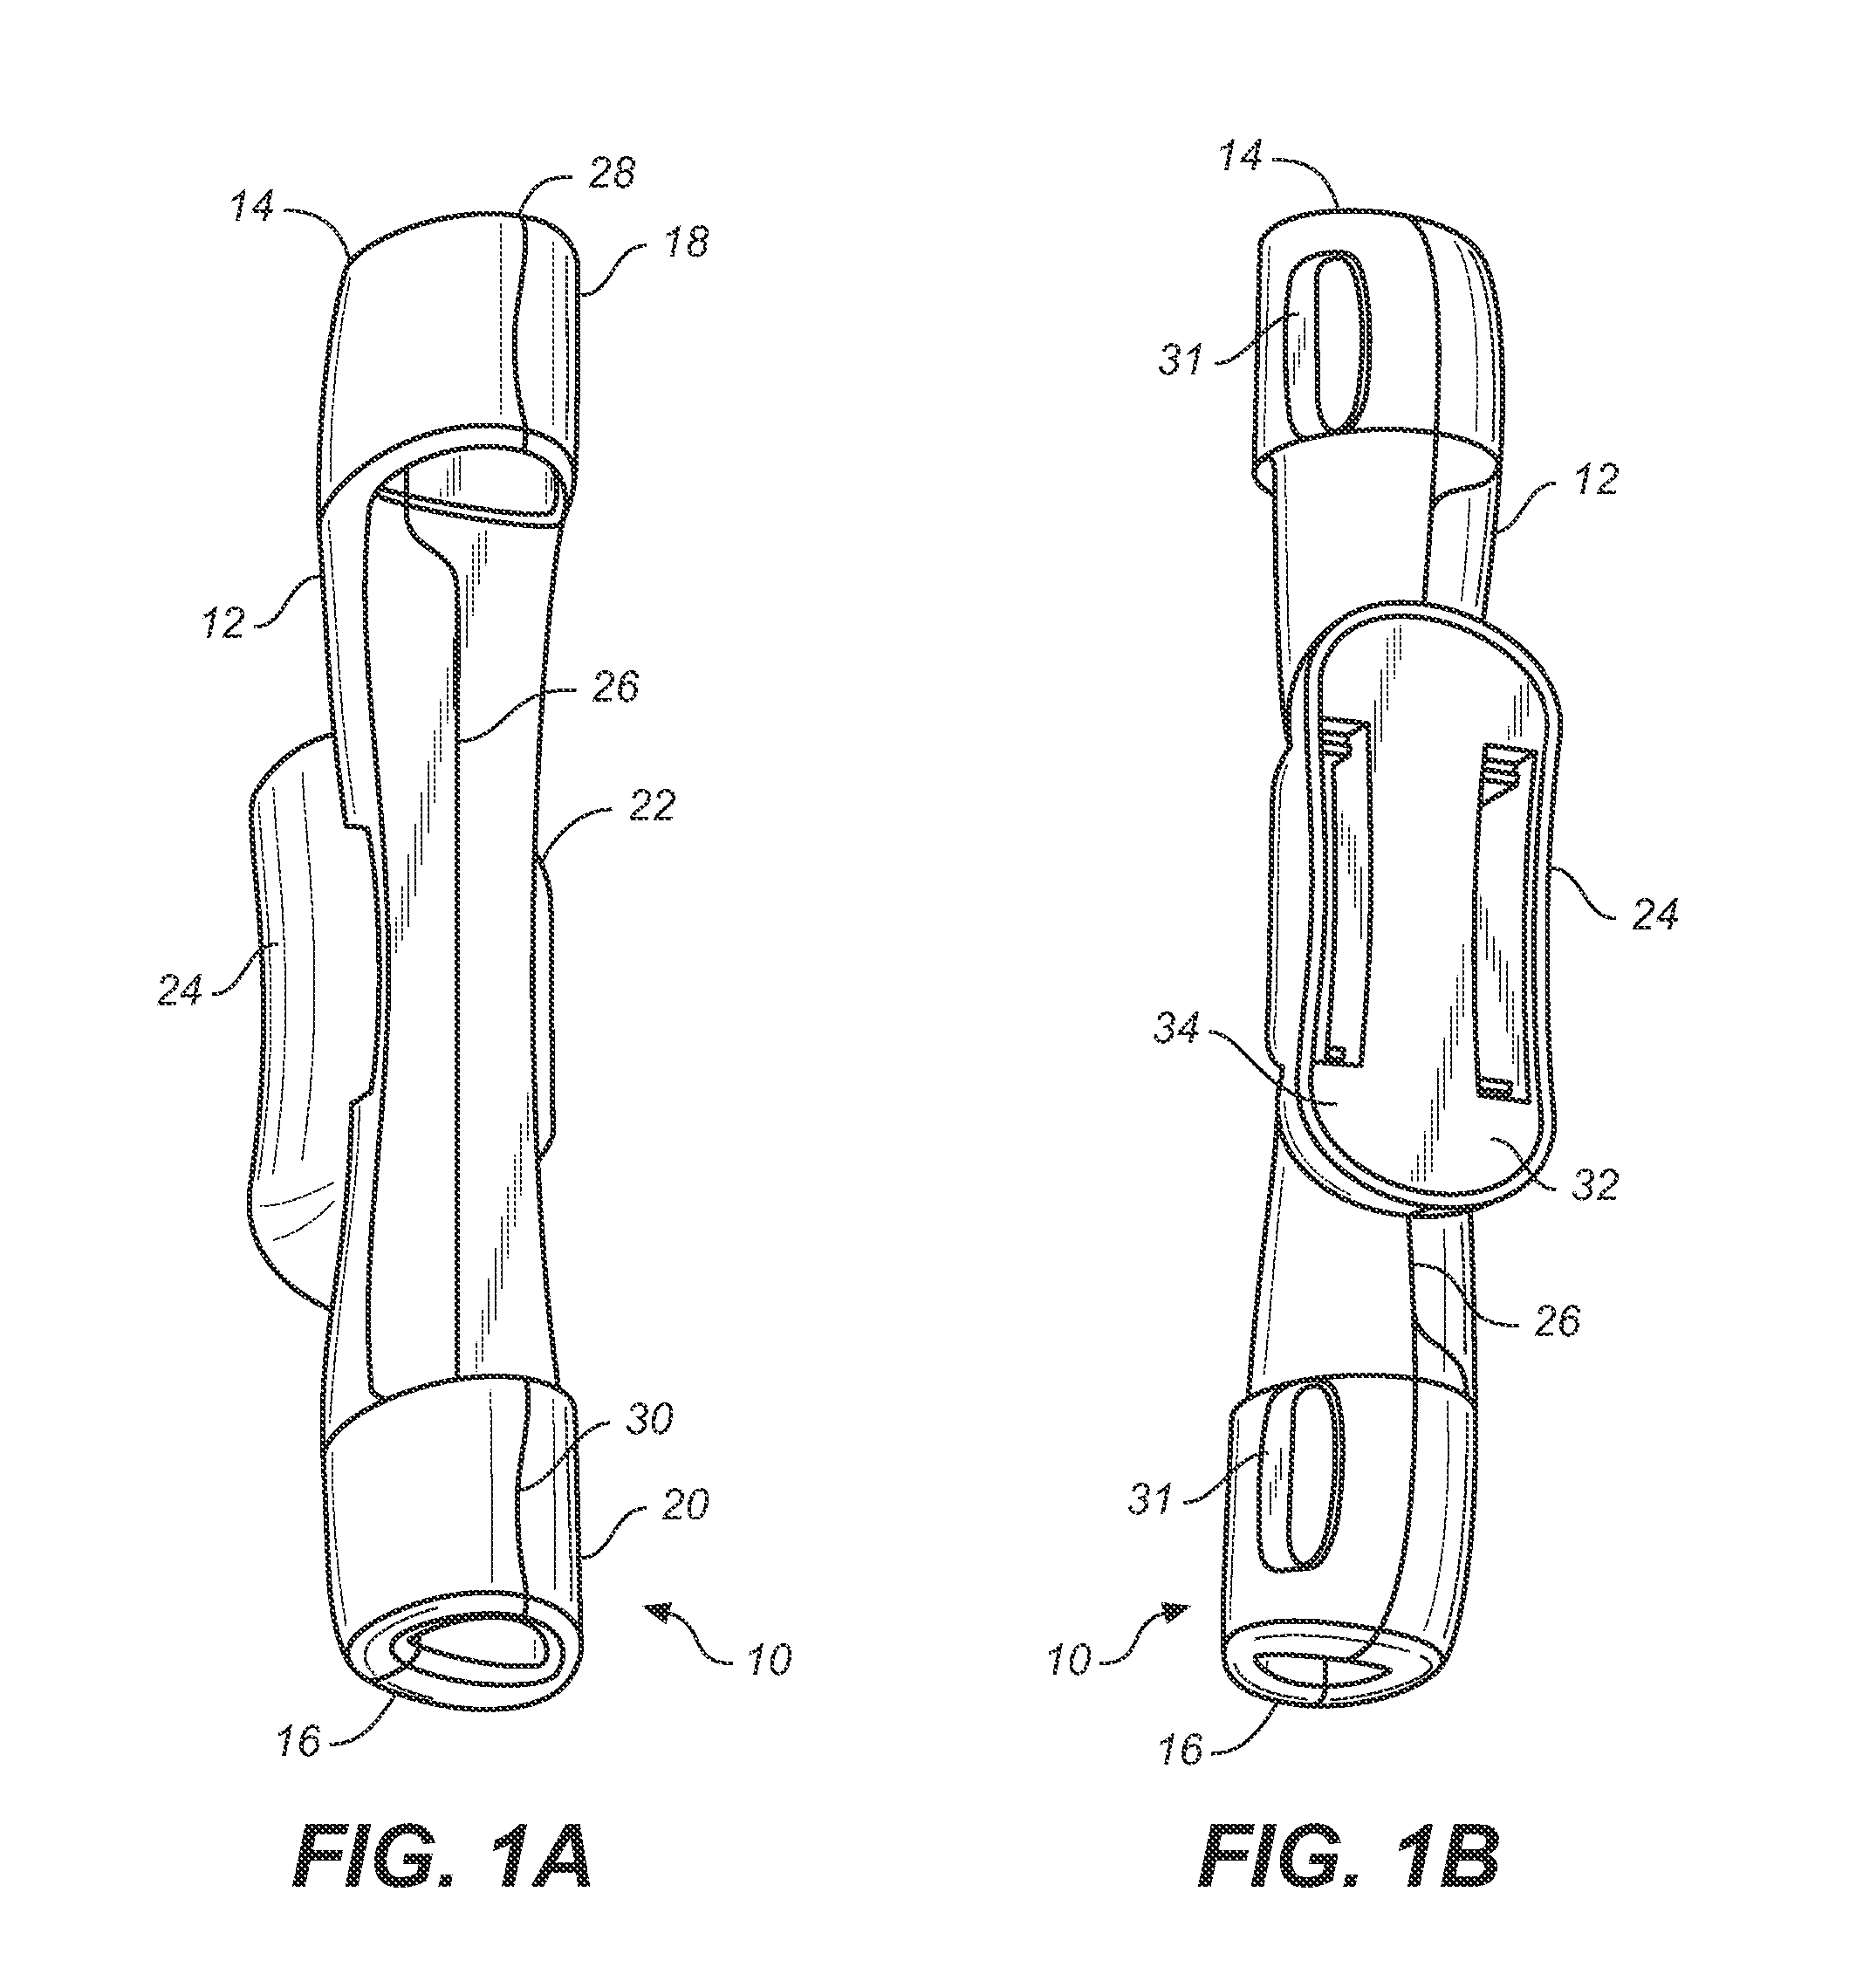 Hinge and Binding Apparatus for Displaying Cards and Papers in the Workplace